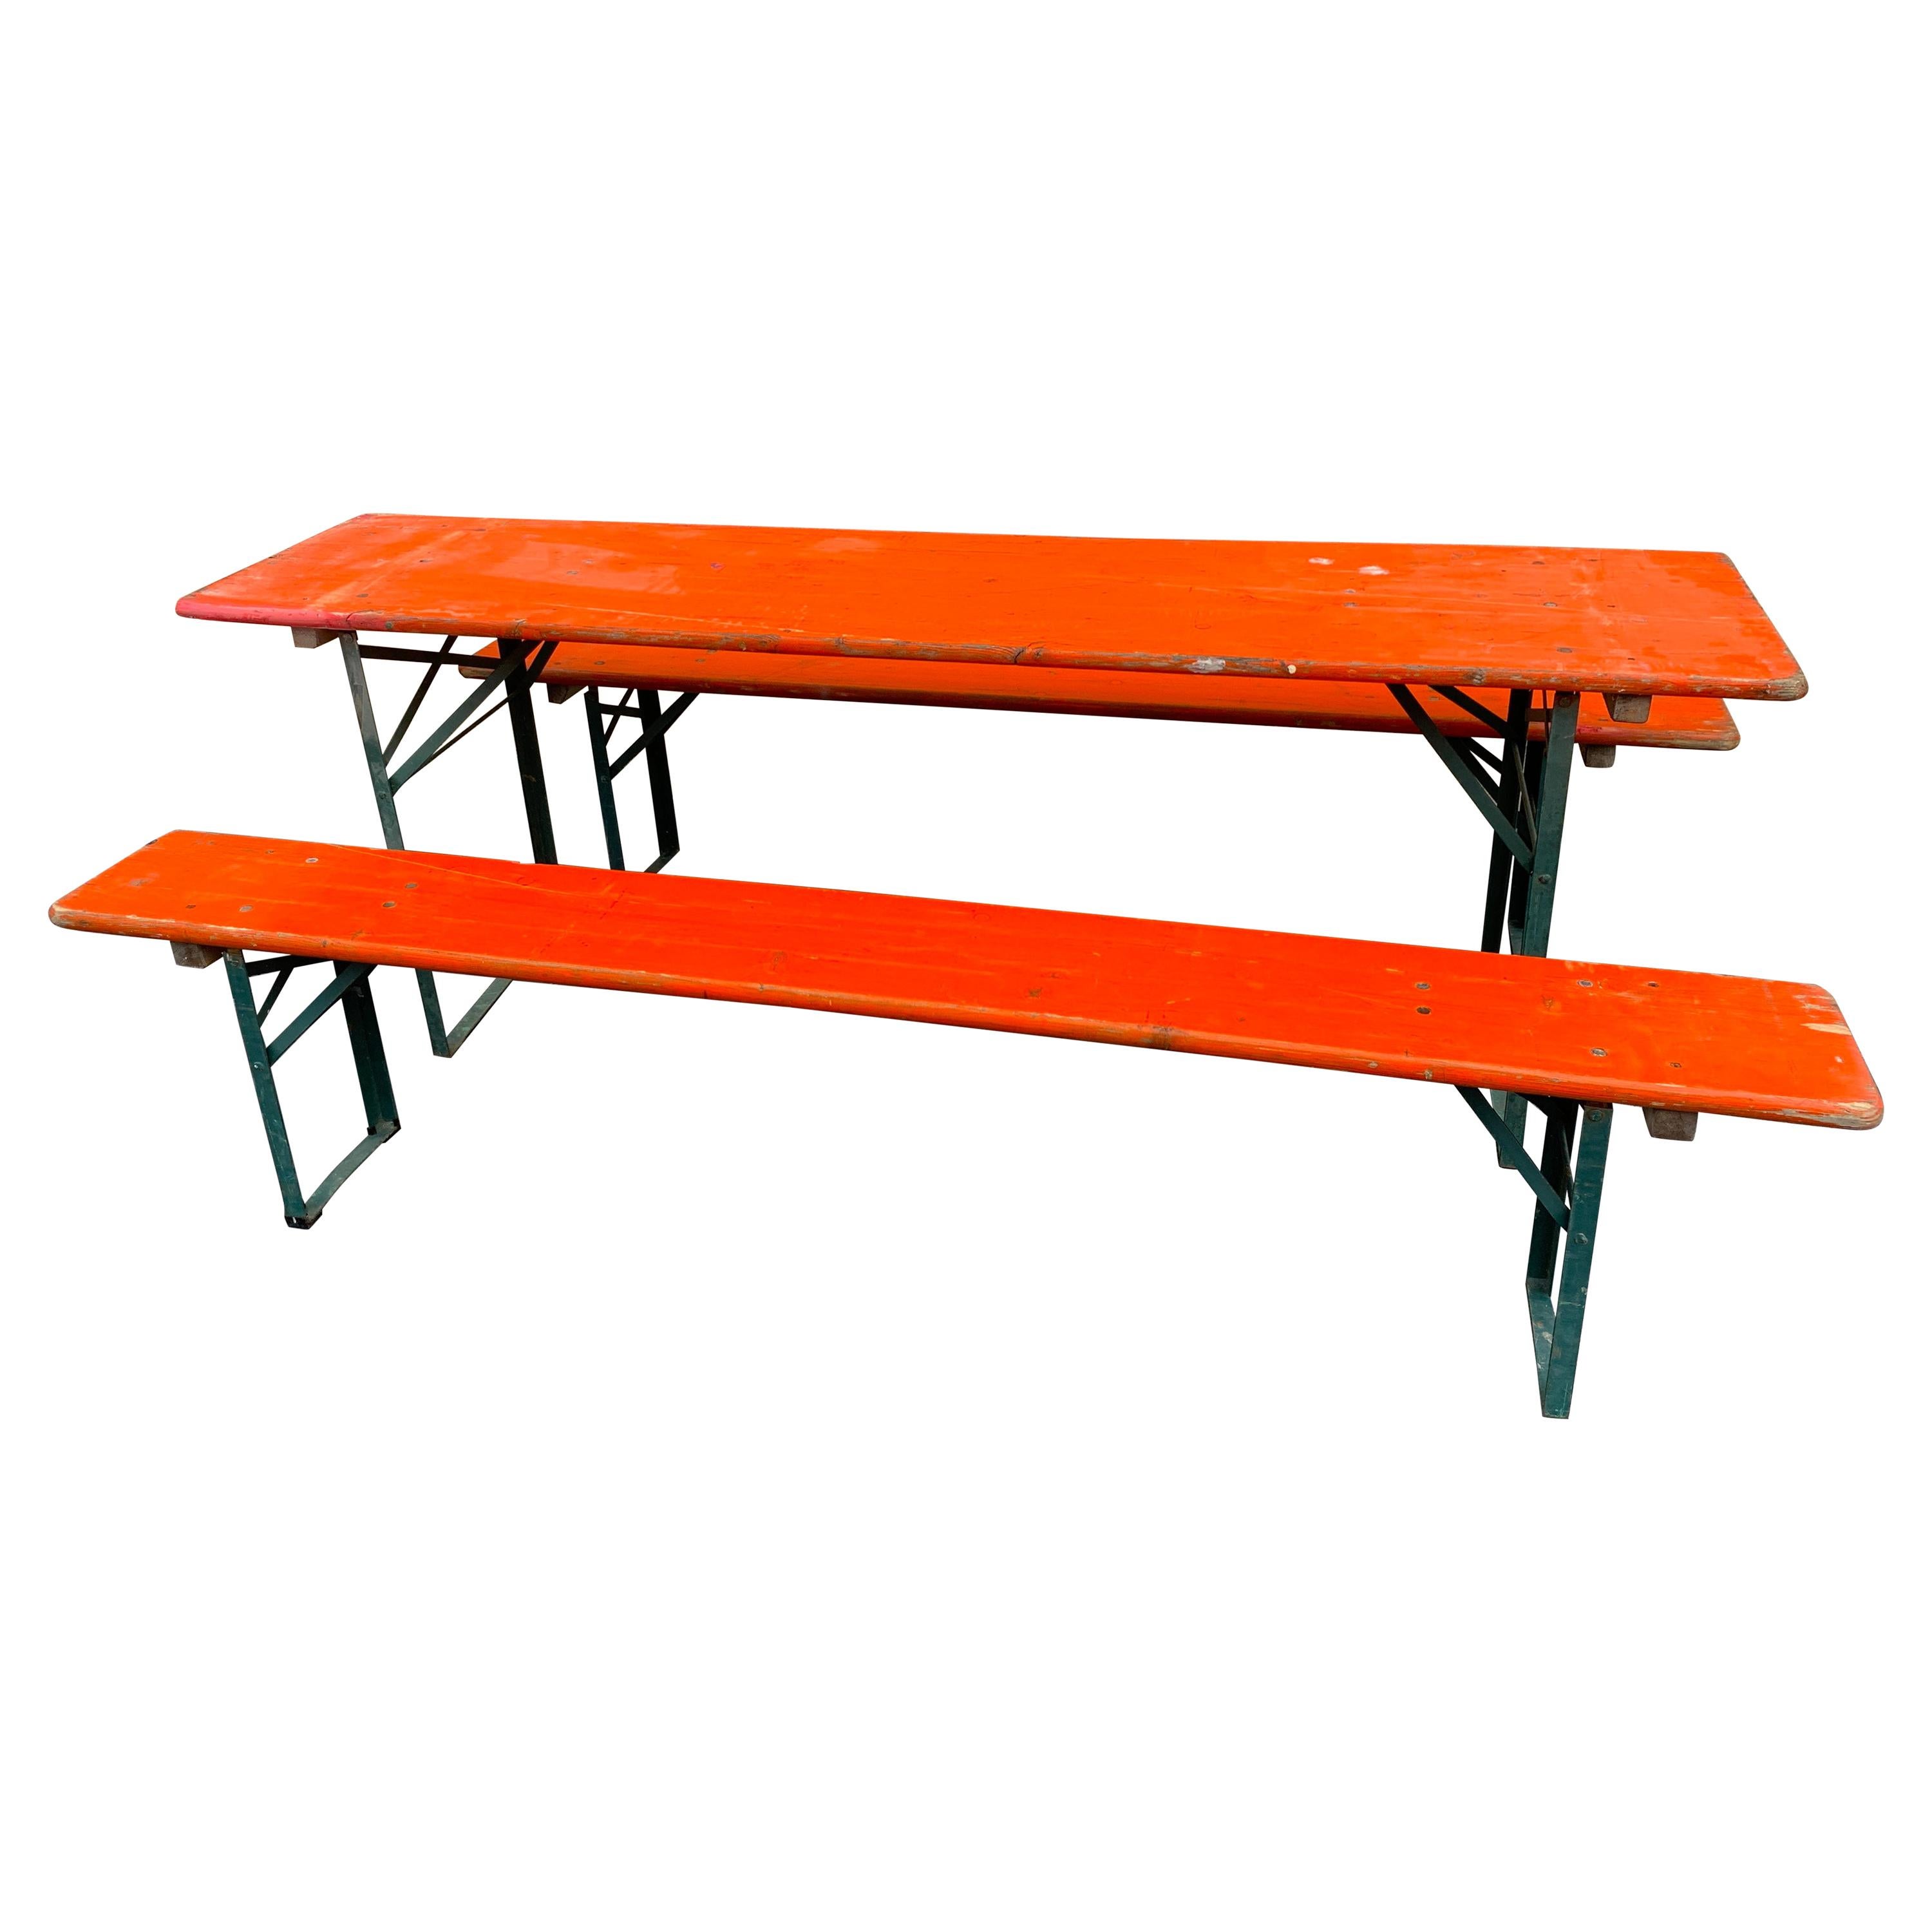 Vintage Collapsable German Beer Garden Table and Bench Set, in Orange